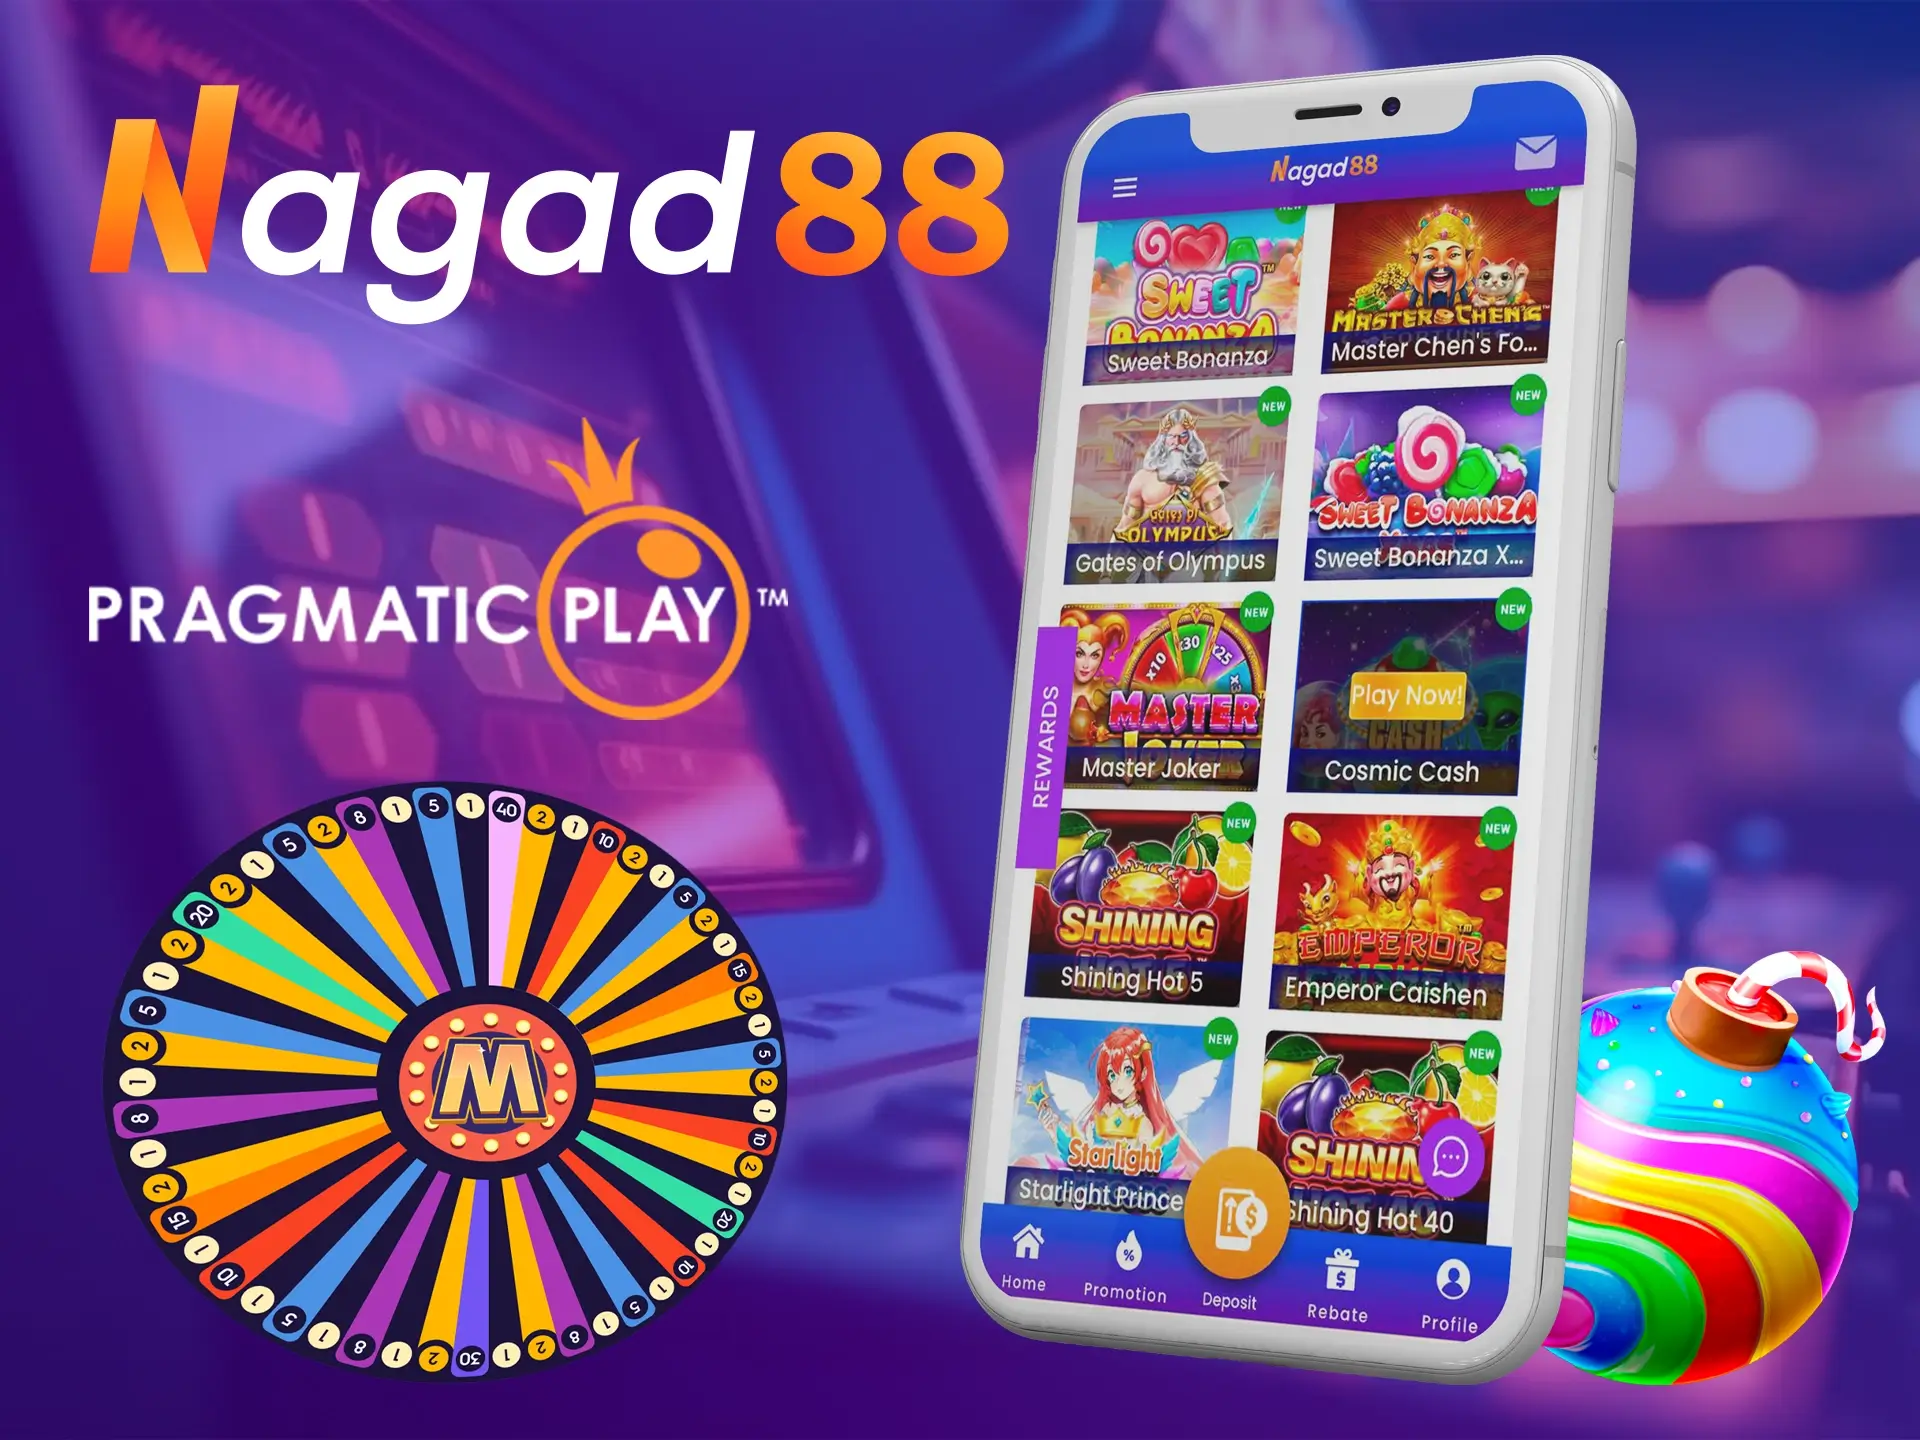 Try Pragmatic play the most famous provider of slot games at Nagad88 Casino.